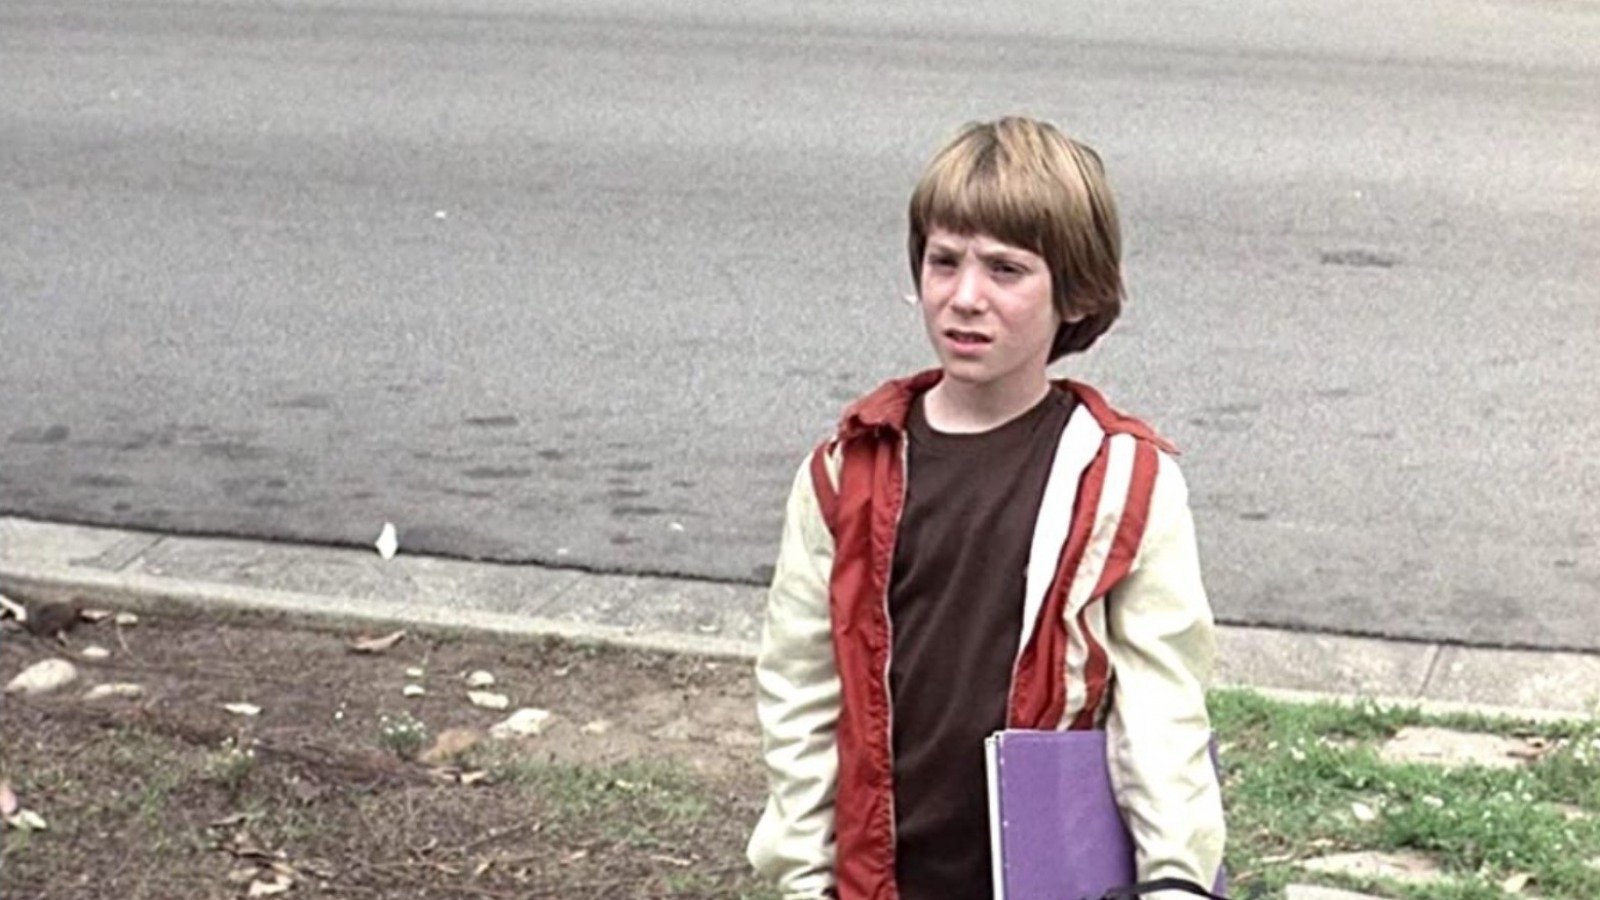 The Little Boy Who Played Tommy In Halloween Is Unrecognizable Now - Looper